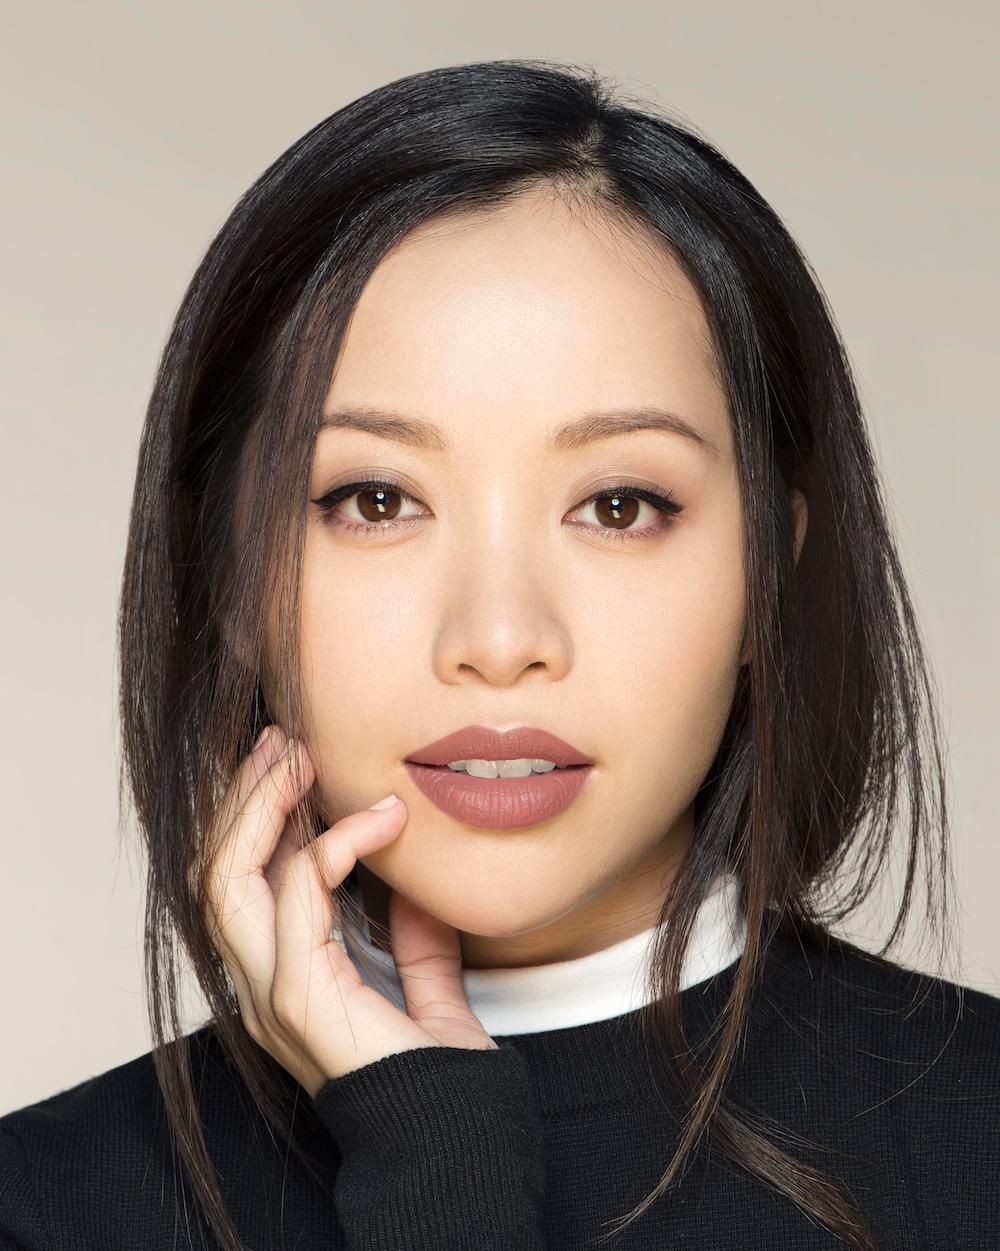 51 Hot Pictures Of Michelle Phan Are Incredibly Excellent 2